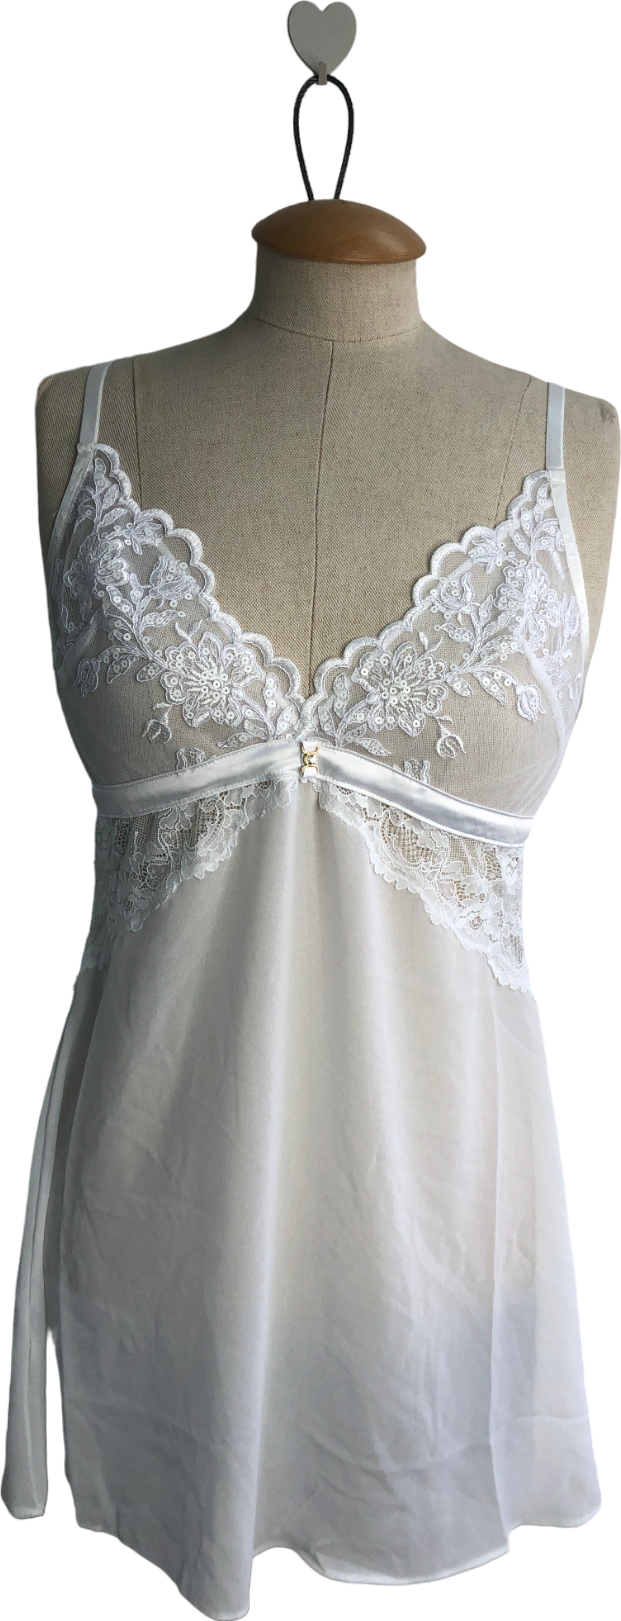 Ann Summers White Icon Chemise UK S